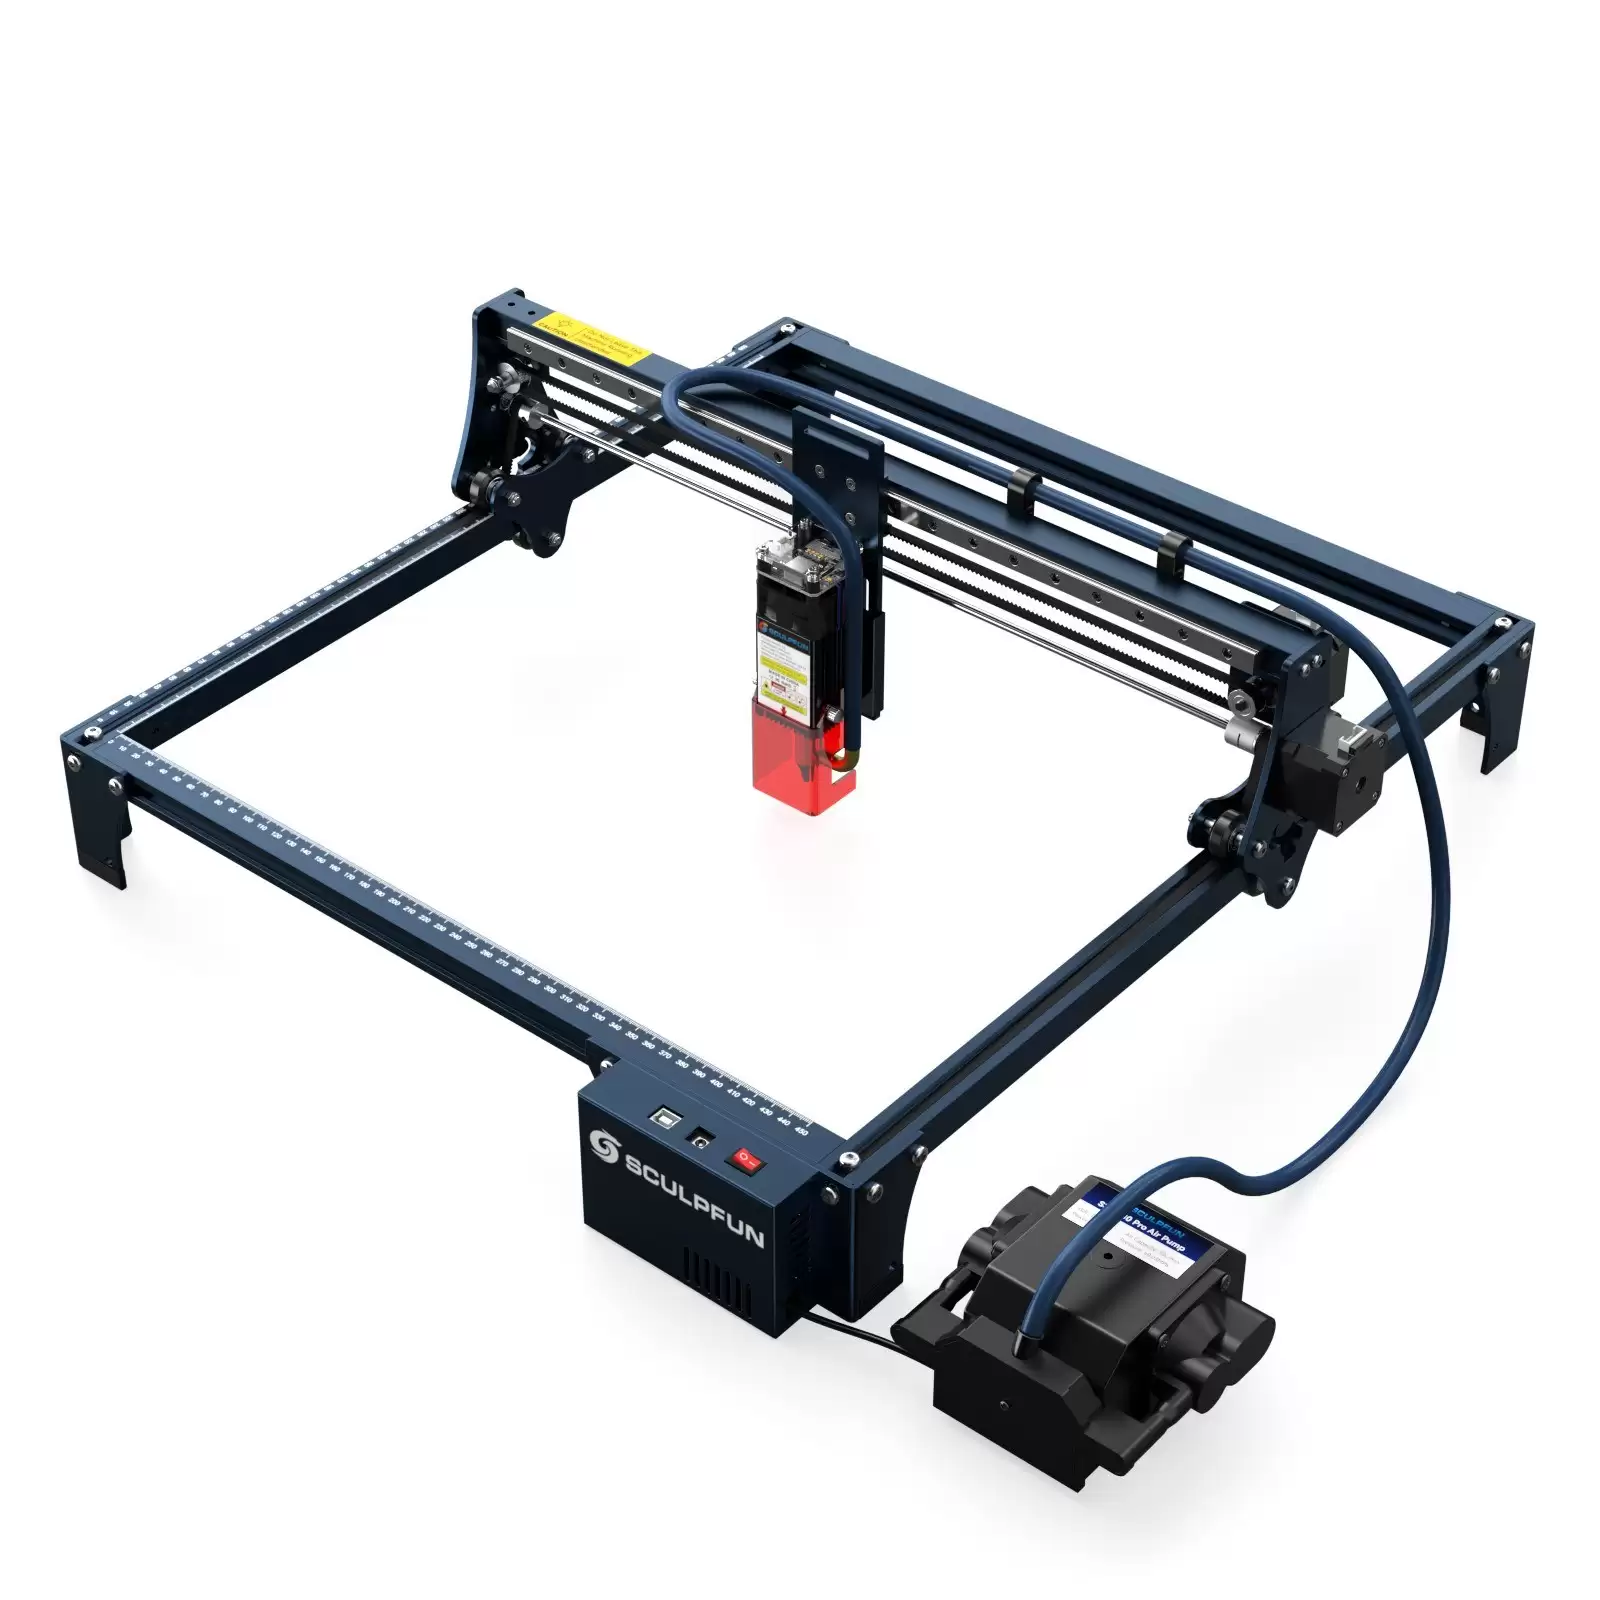 Order In Just $279.99 Sculpfun S30 5w Laser Engraver At Tomtop